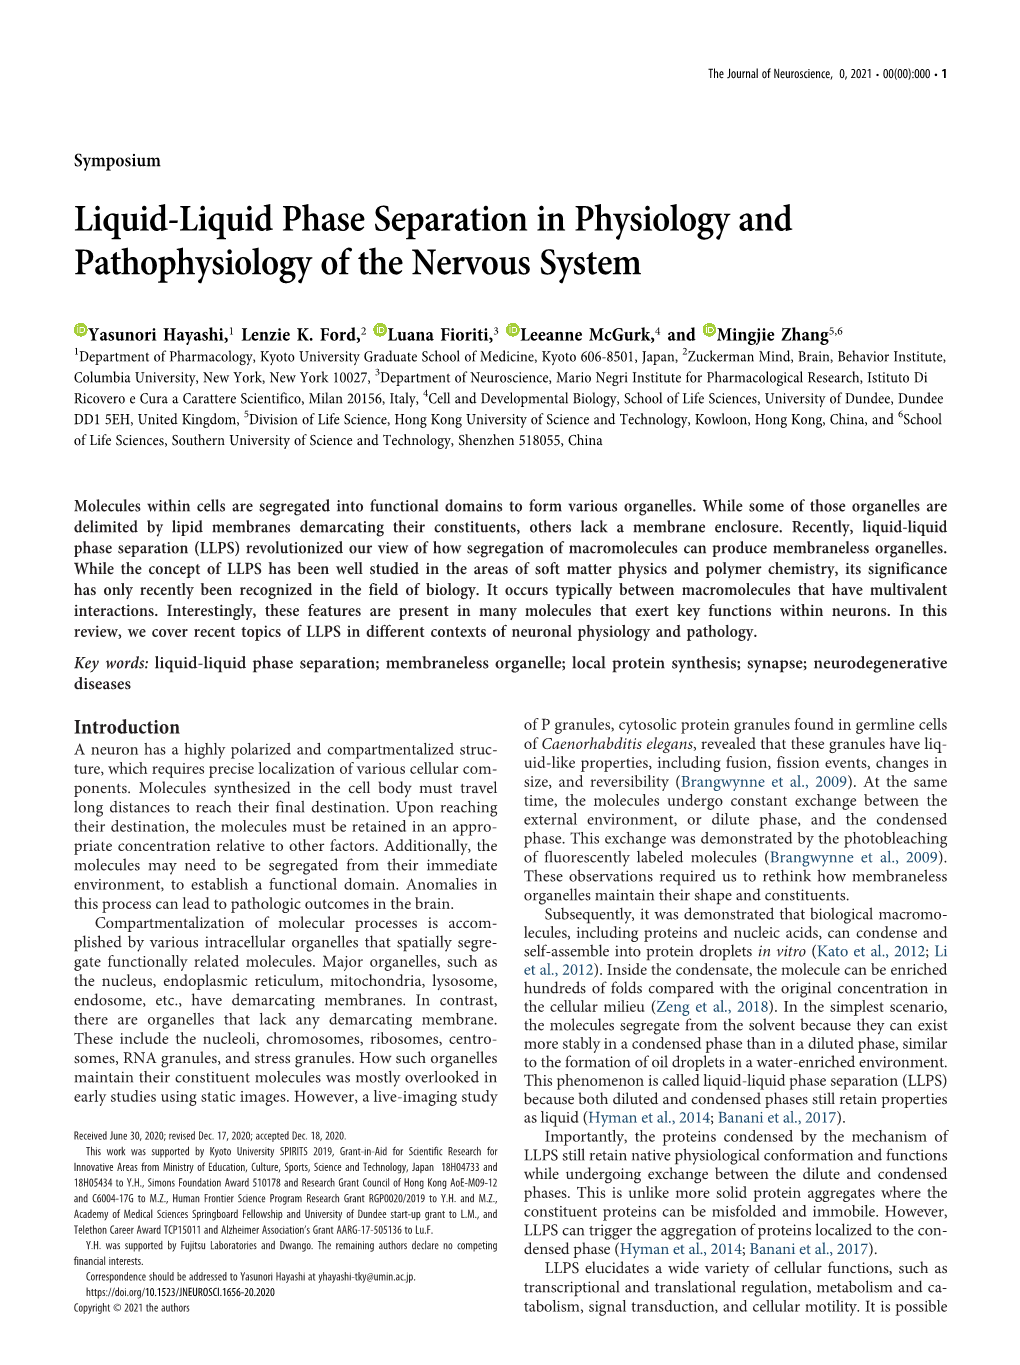 Liquid-Liquid Phase Separation in Physiology and Pathophysiology of the Nervous System